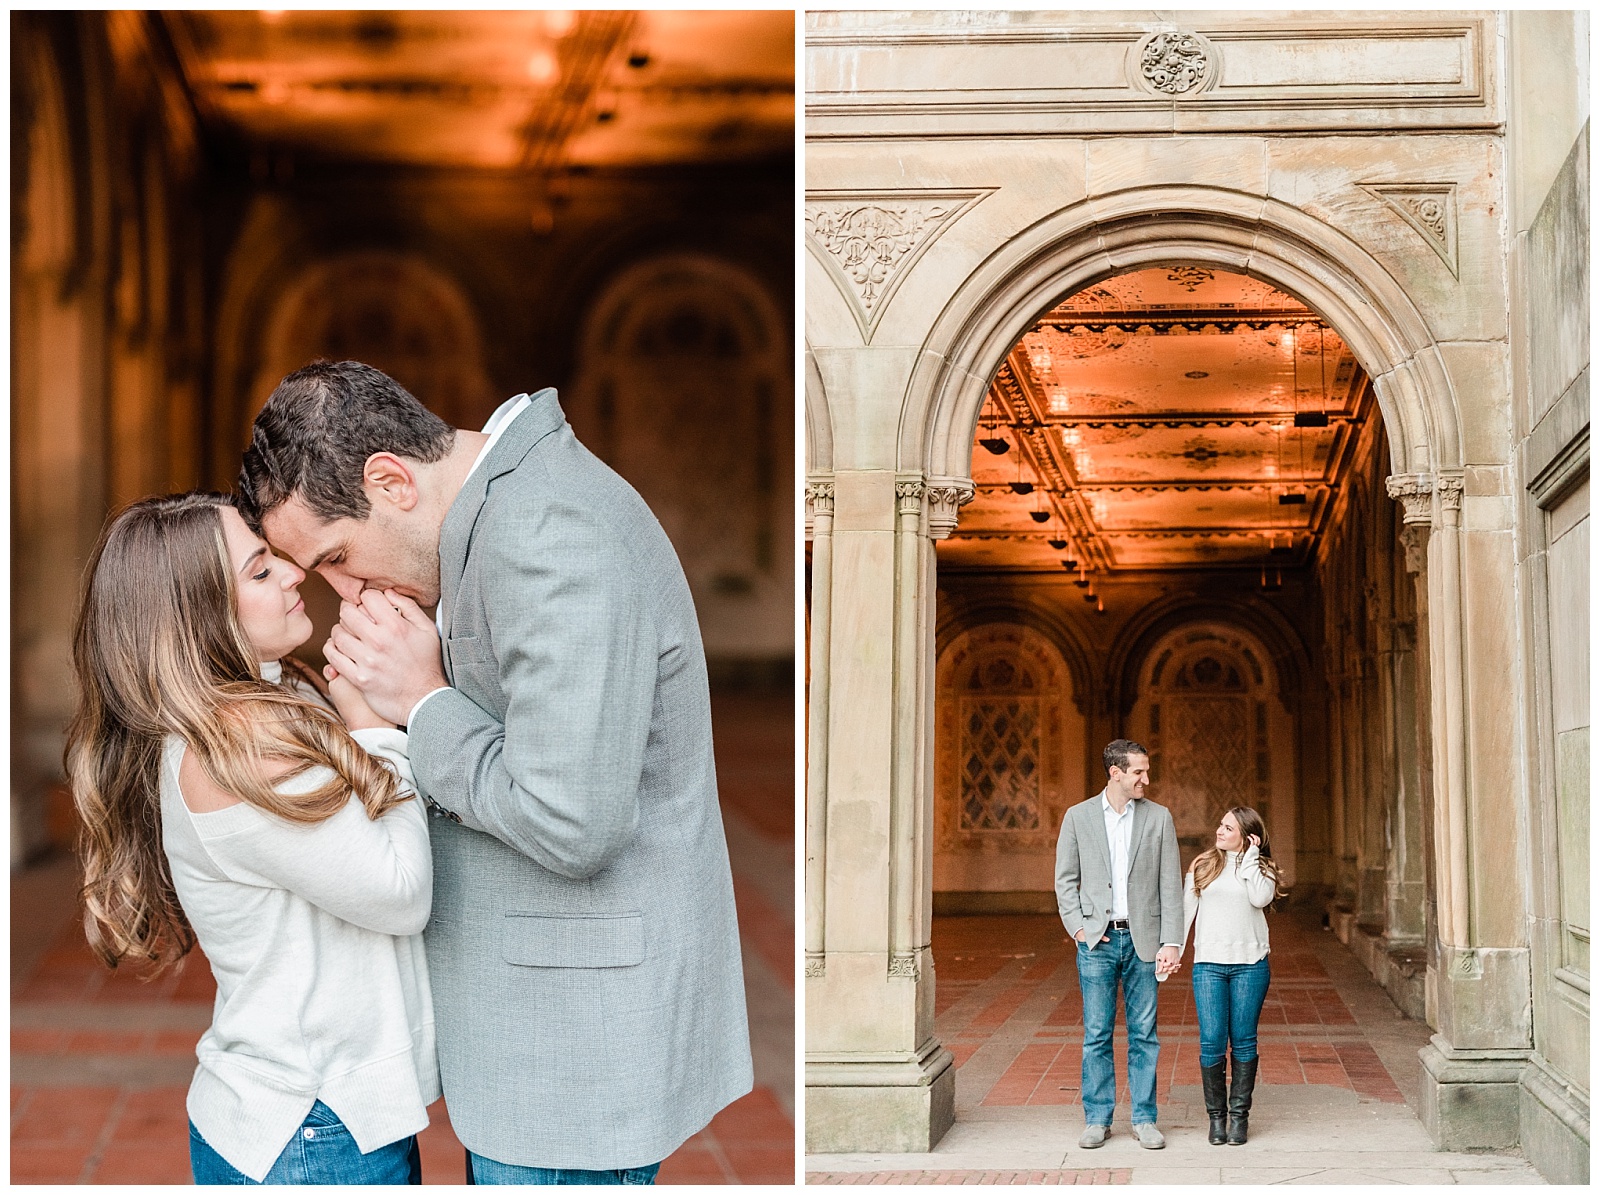 Bethesda Terrace,Central Park,City,Engagement Session,Fall,NYC,Nature,New York,Wedding Photographer,